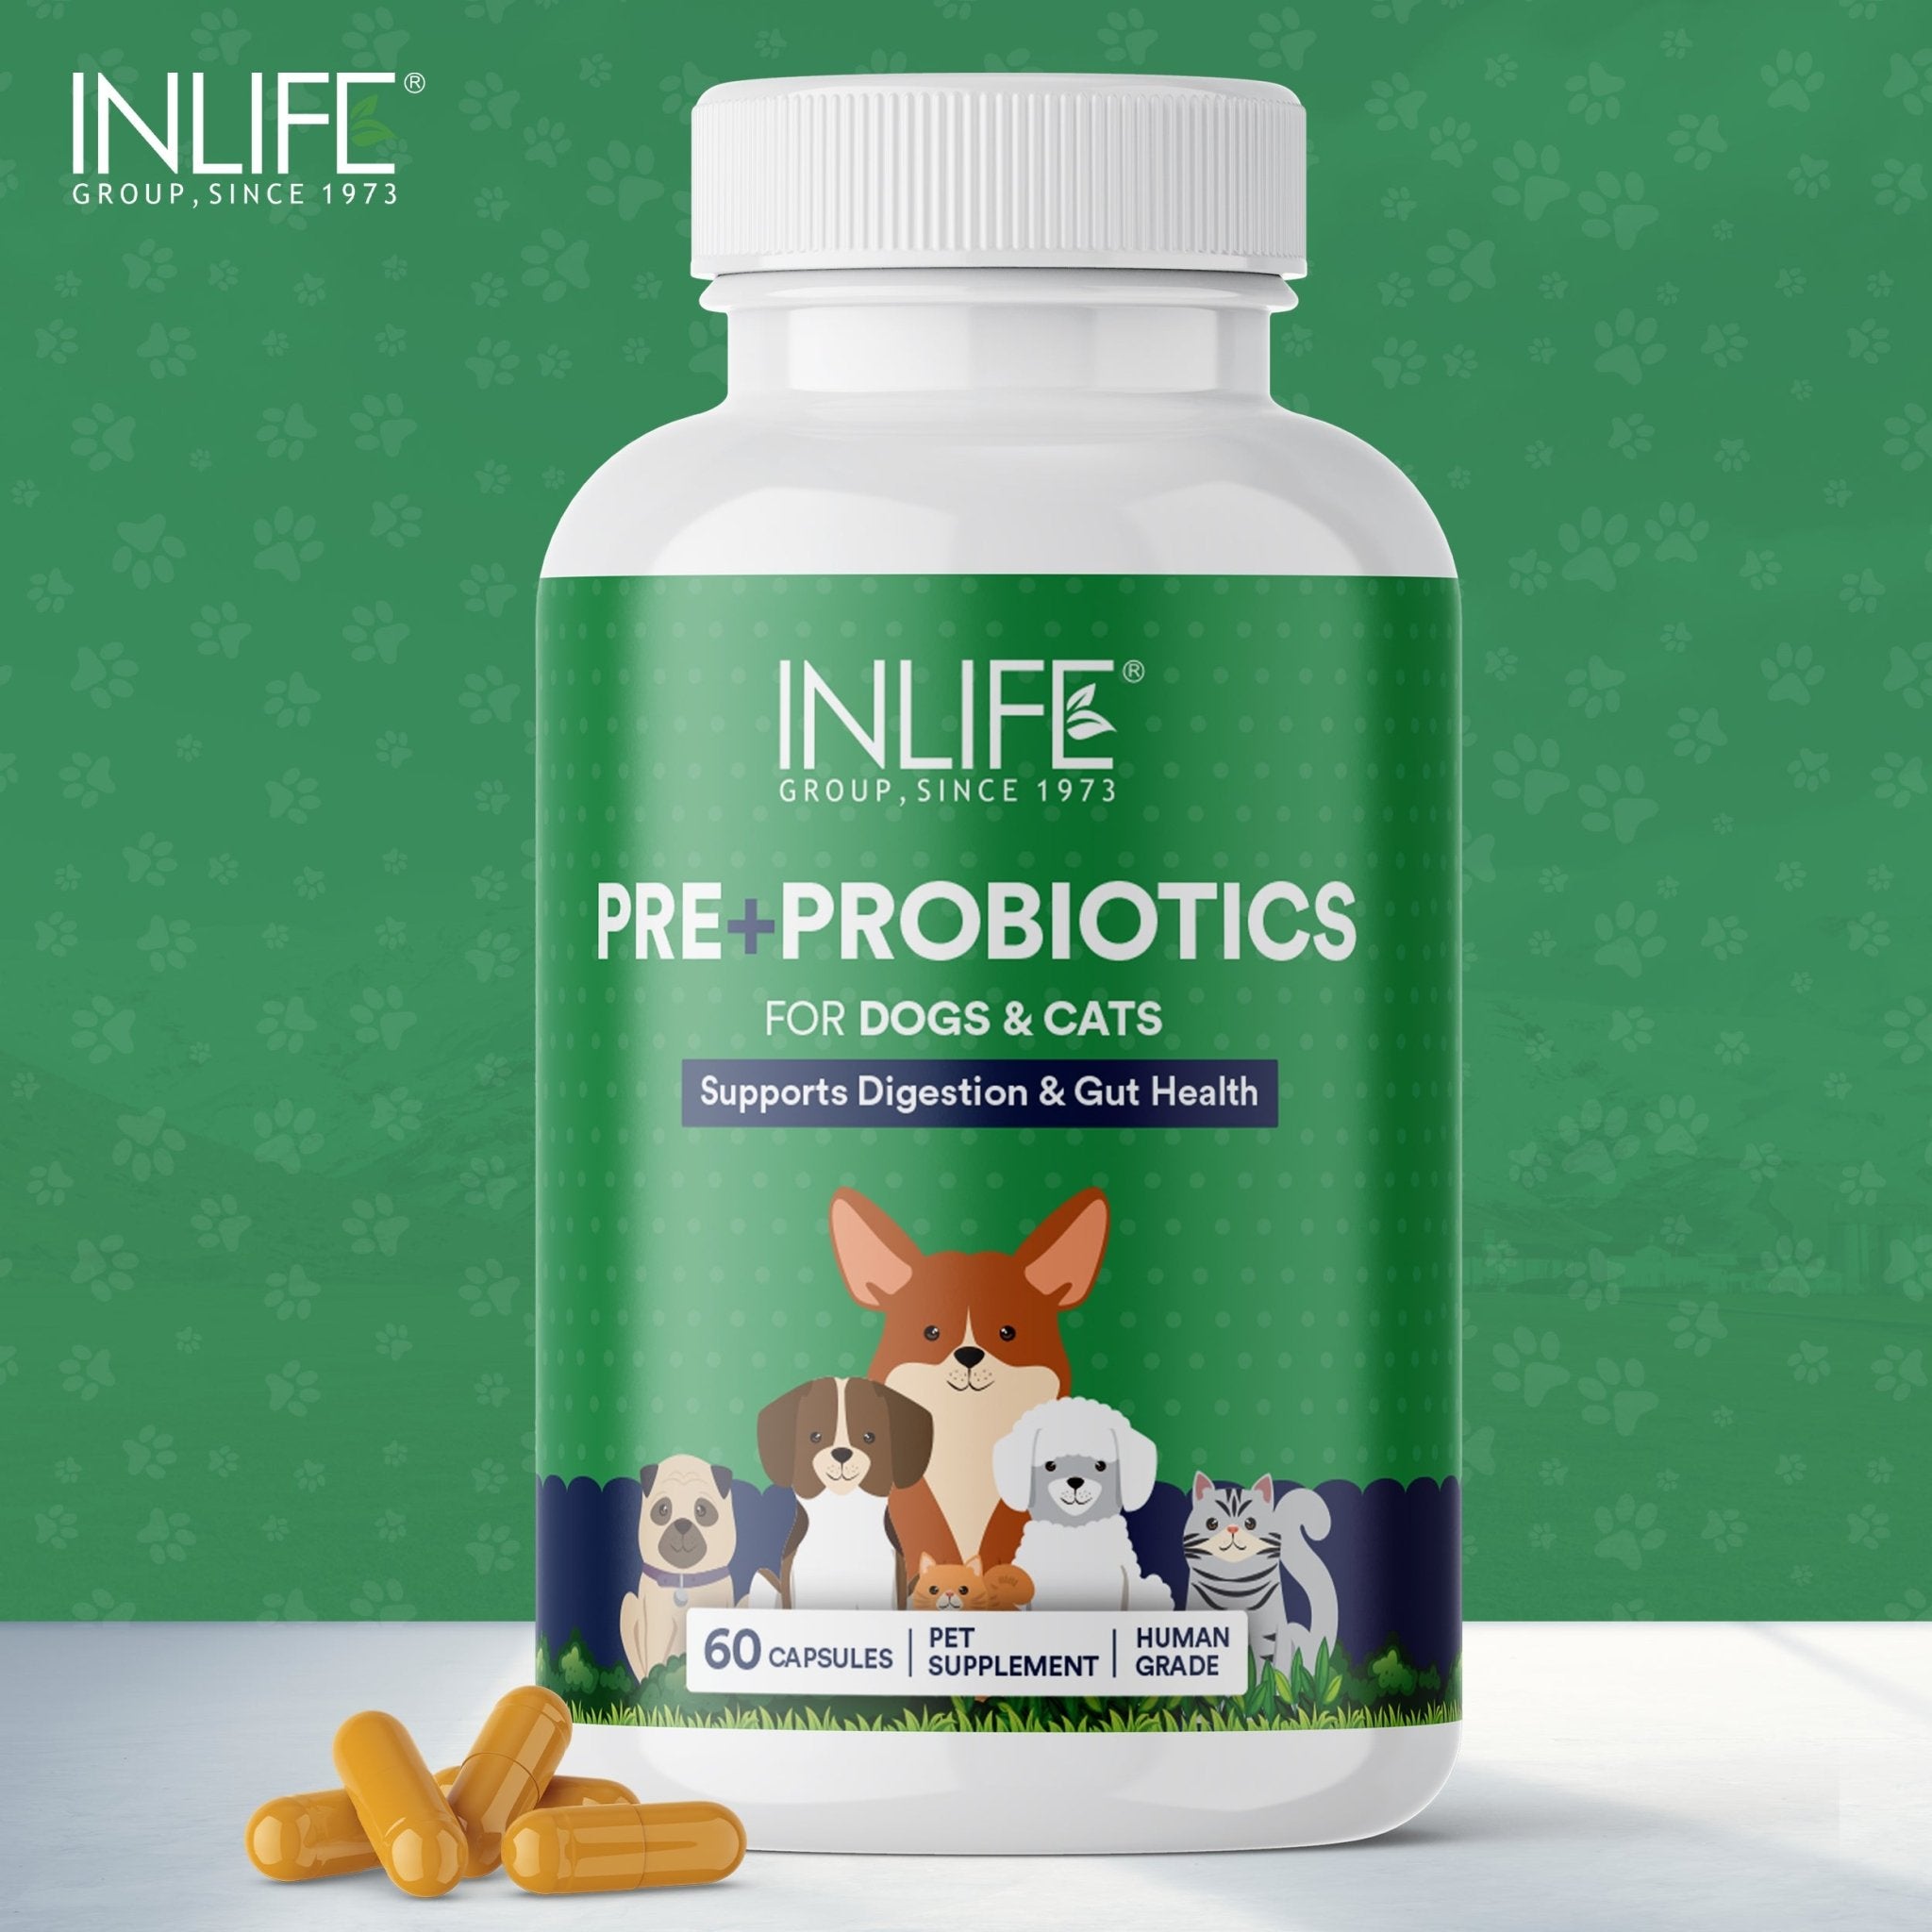 INLIFE Prebiotics & Probiotics for Dogs Cats Pets | Supplements for Gut Health | Lactobacillus Bacteria for Digestive Health | Immunity - 60 Capsules - Inlife Pharma Private Limited